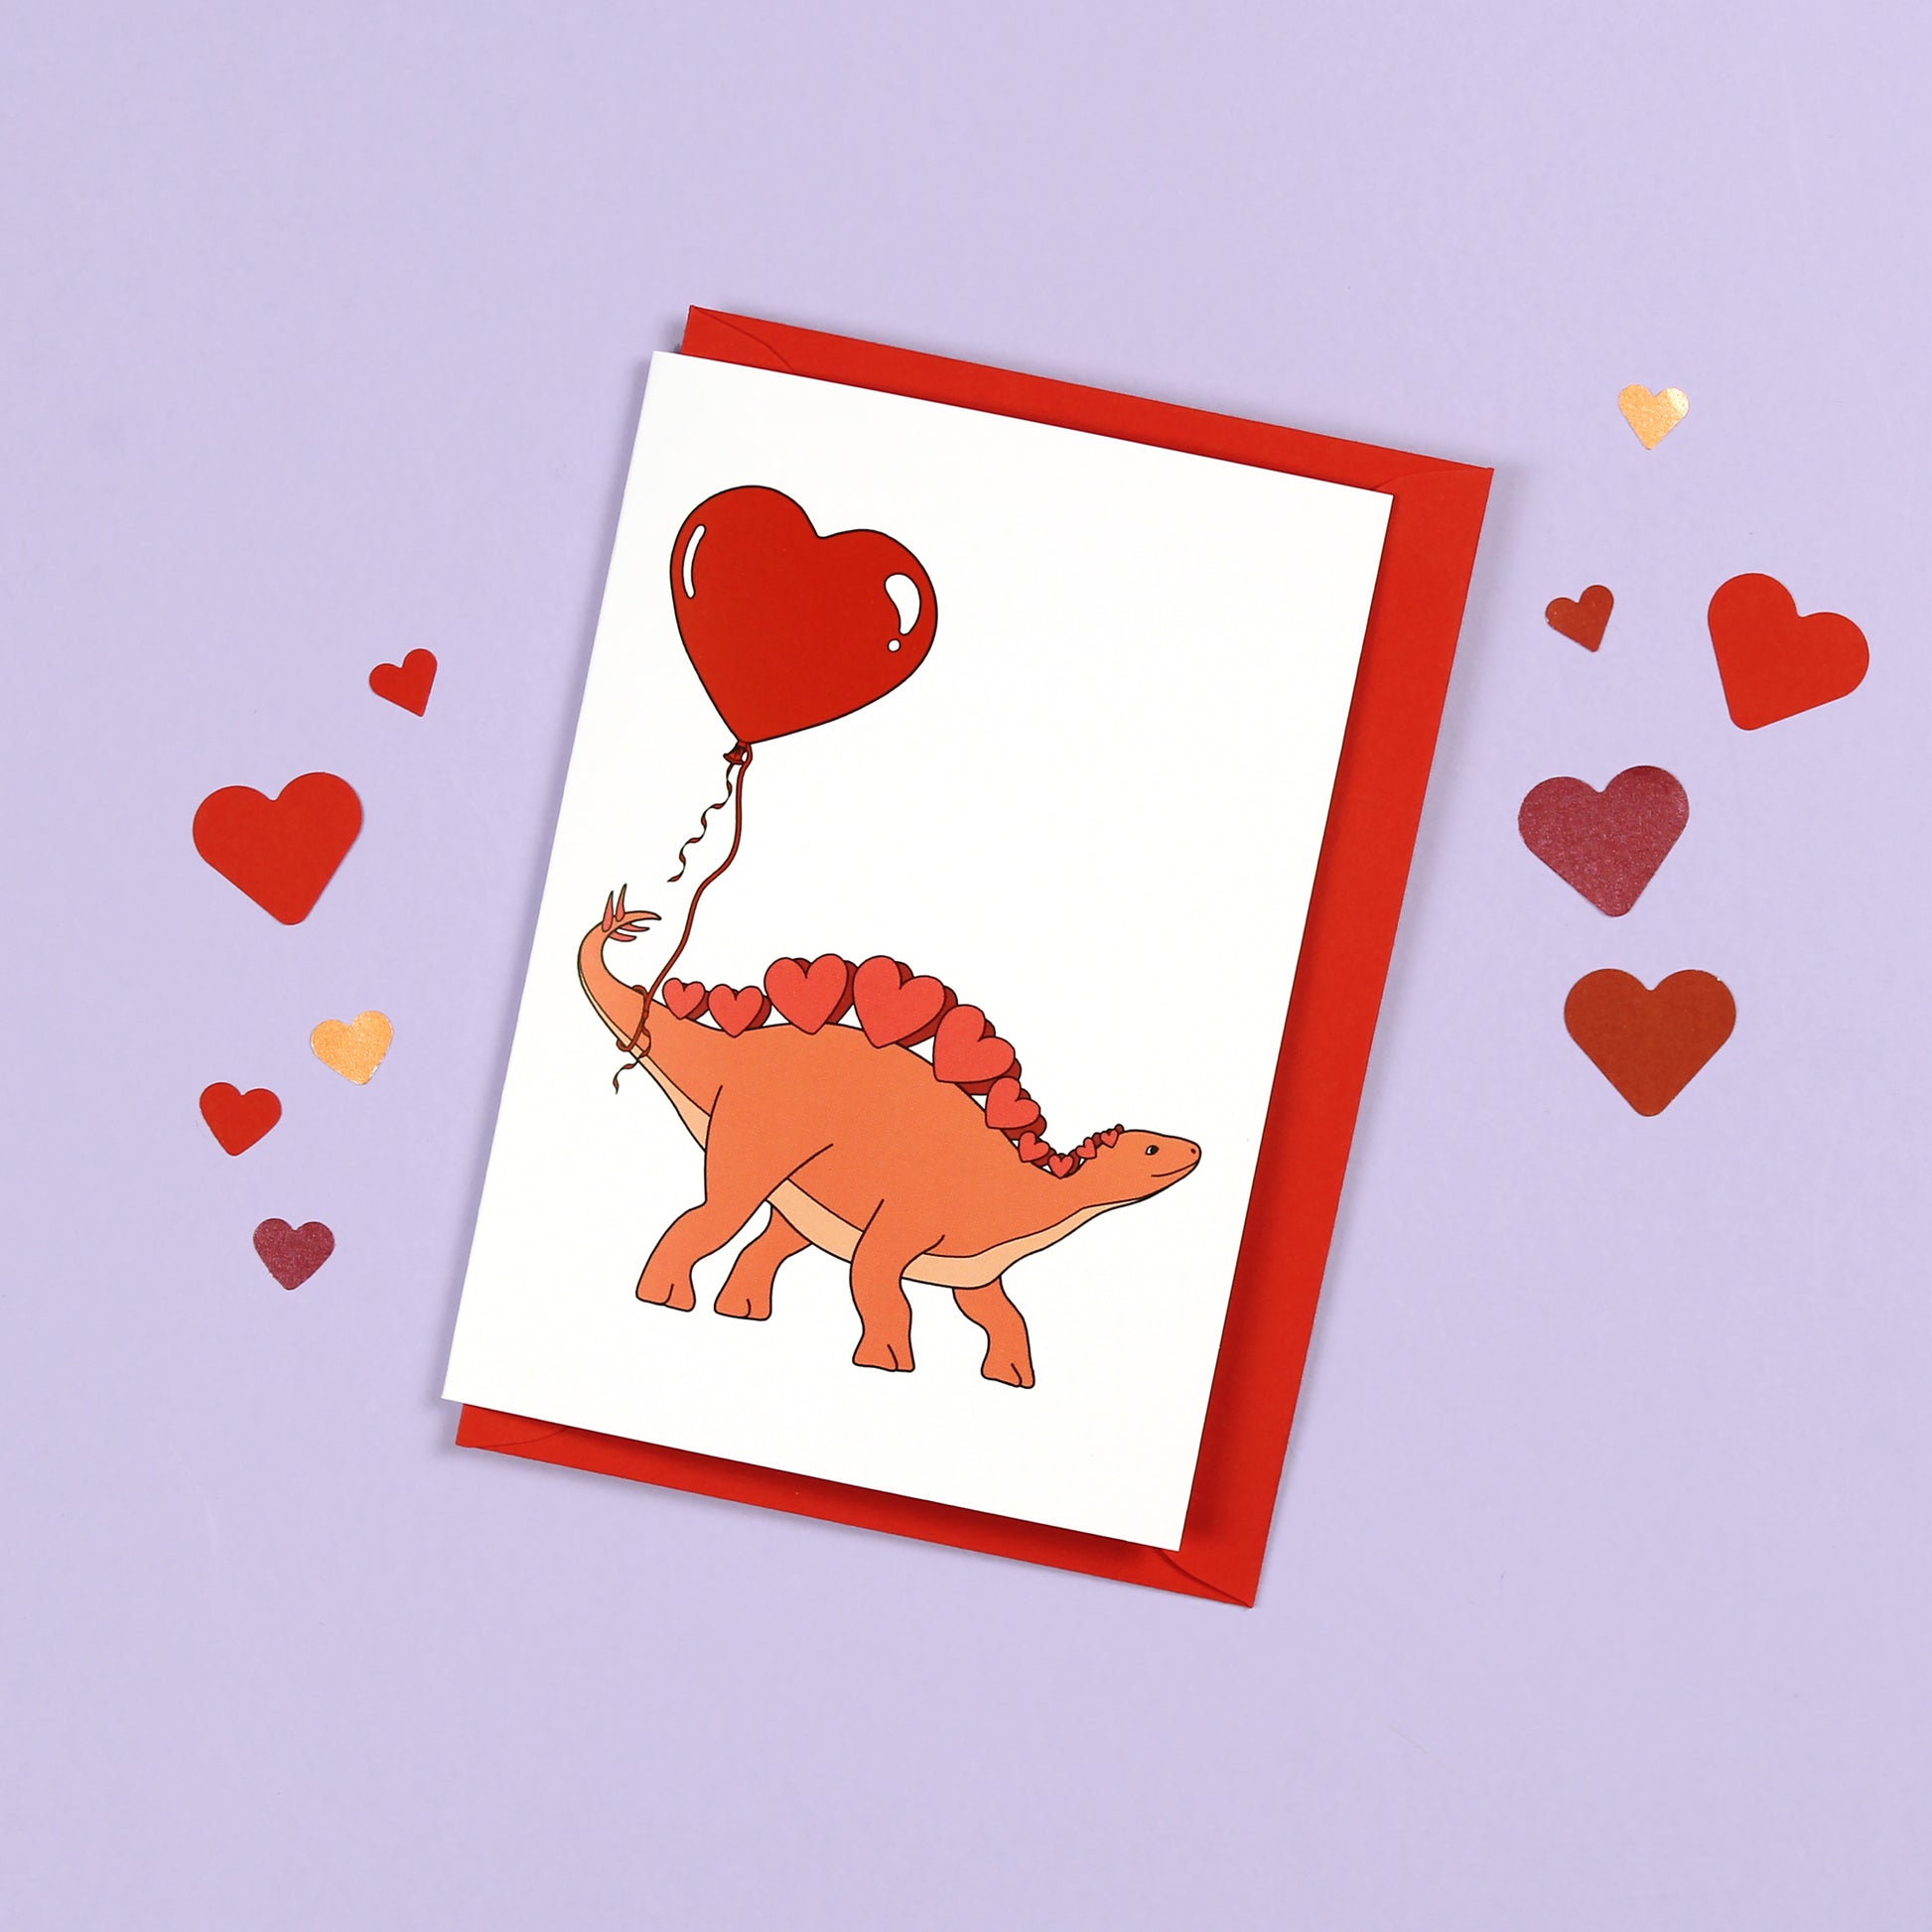 Heart Stegosaurus Dinosaur Greeting Card on a purple background with confetti hearts scattered around it